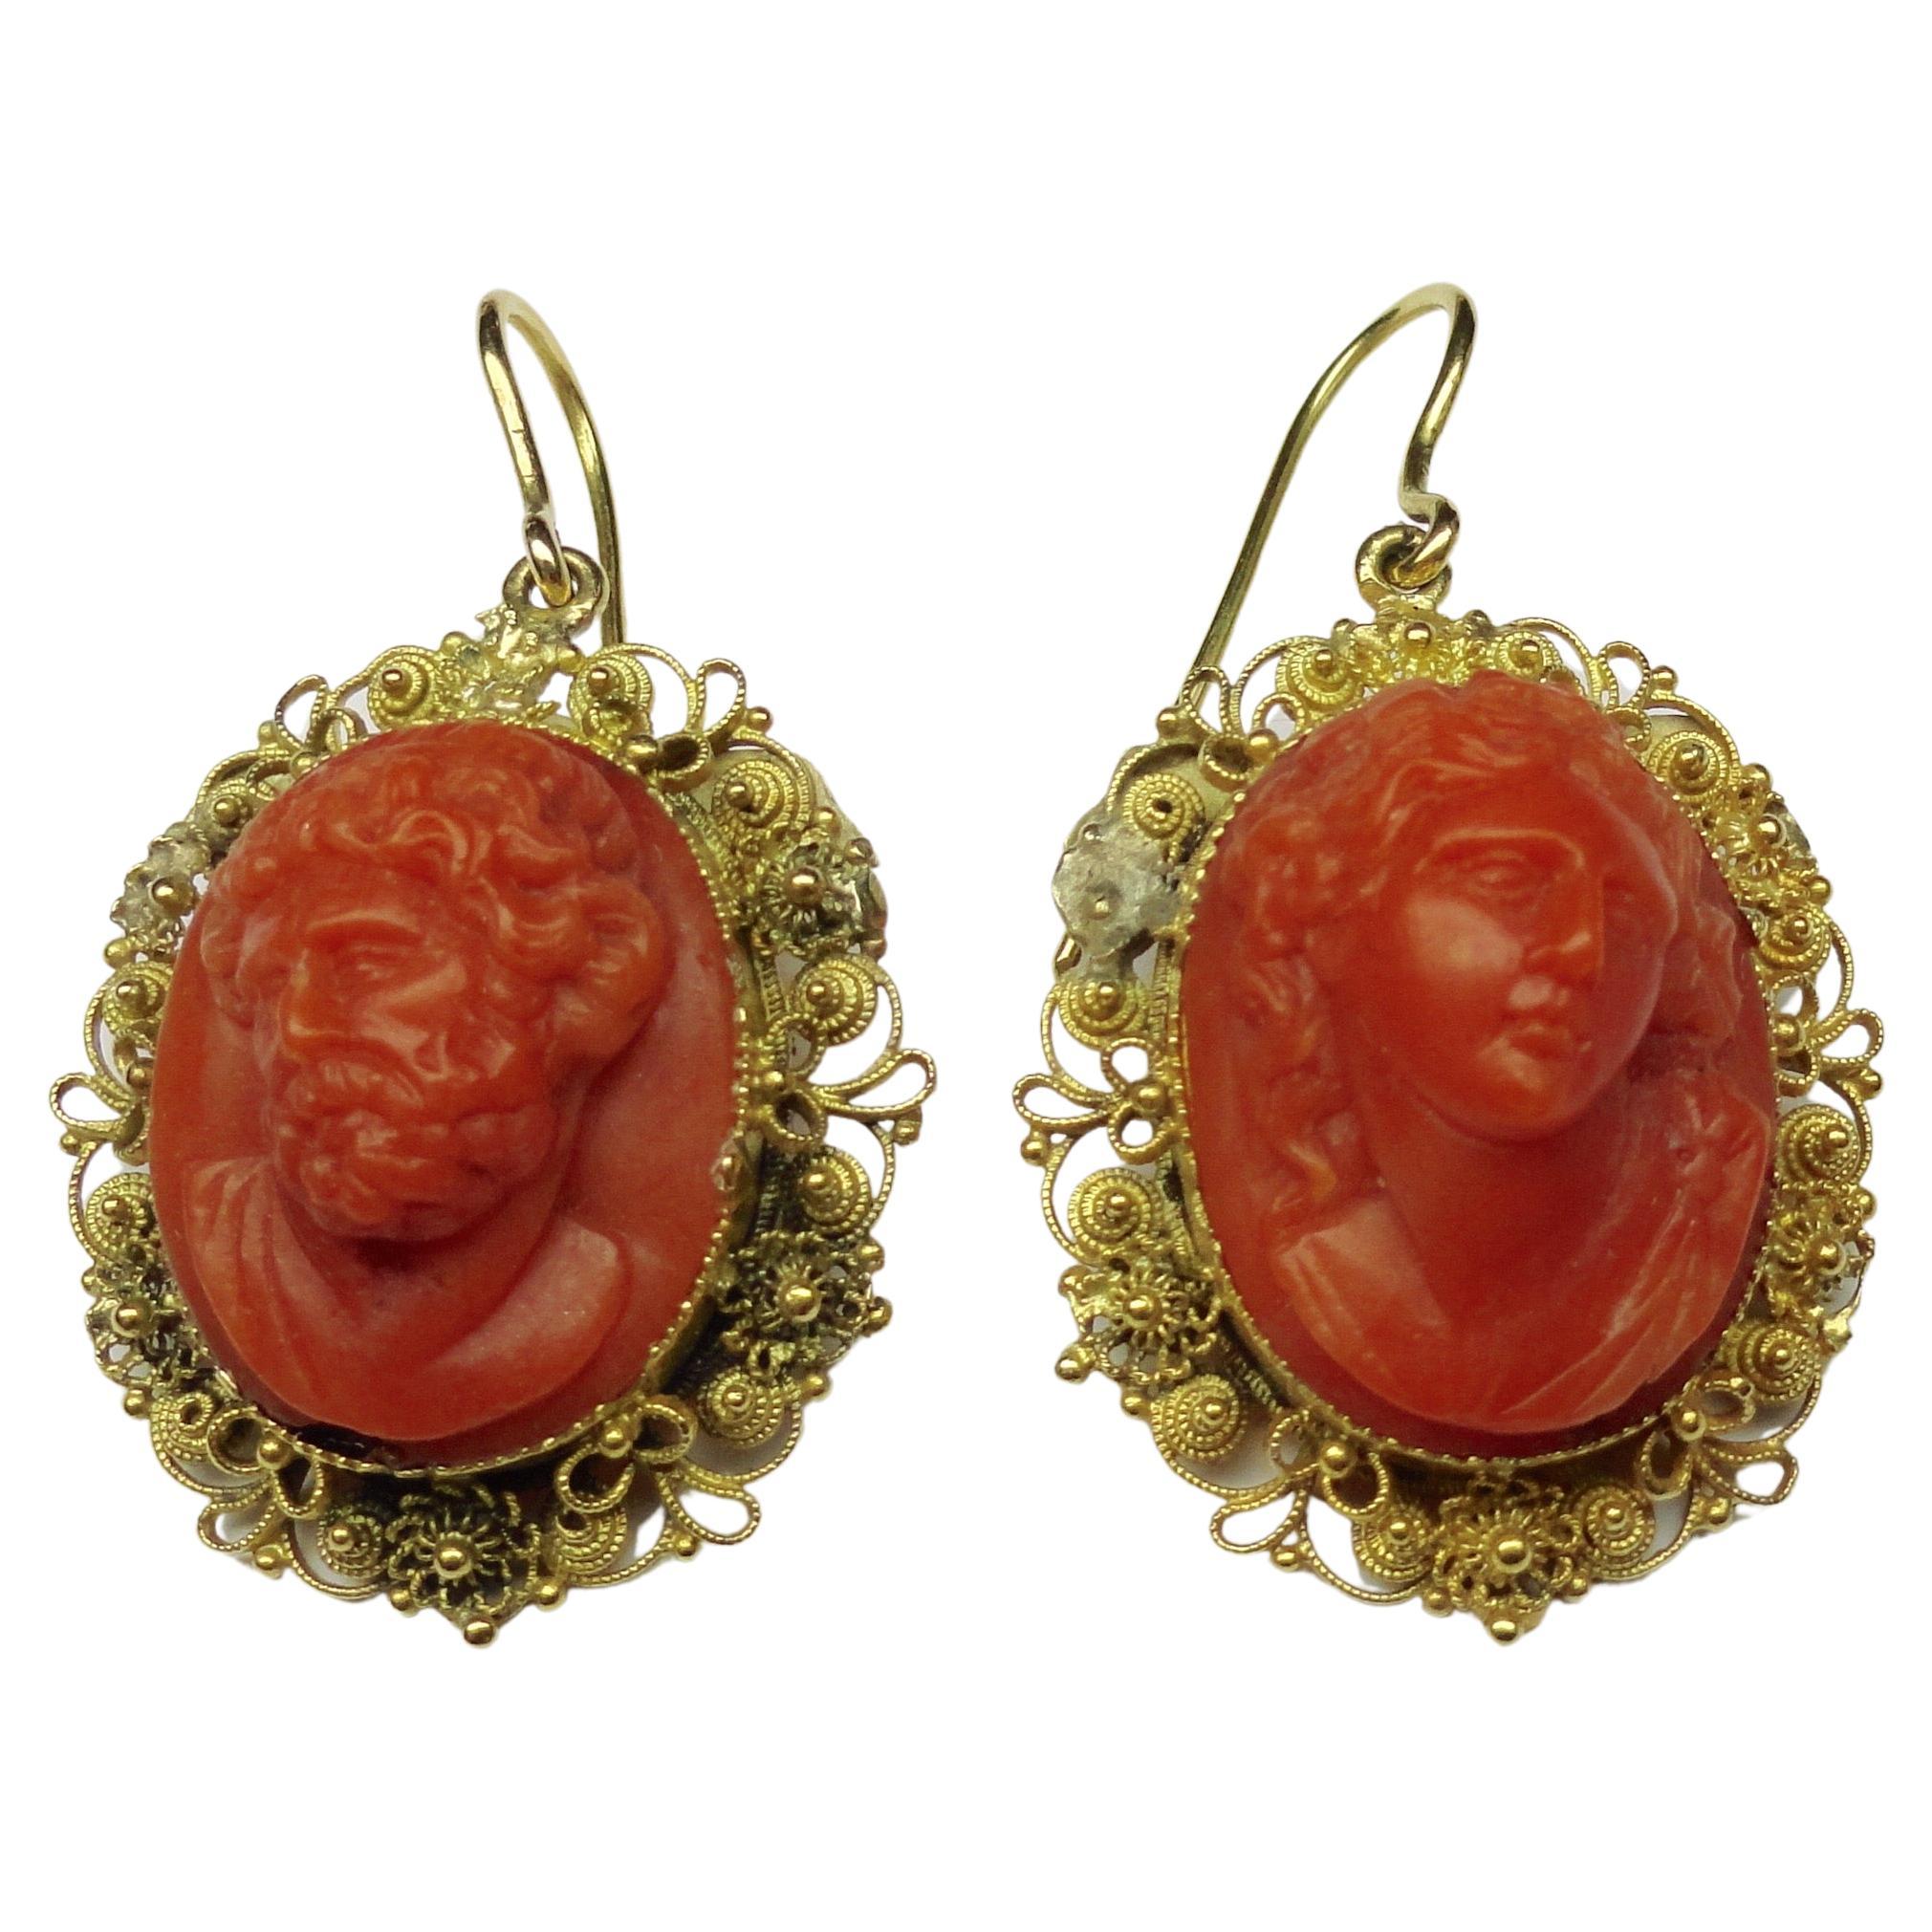 Antique Filigree Coral Cameo Earrings 